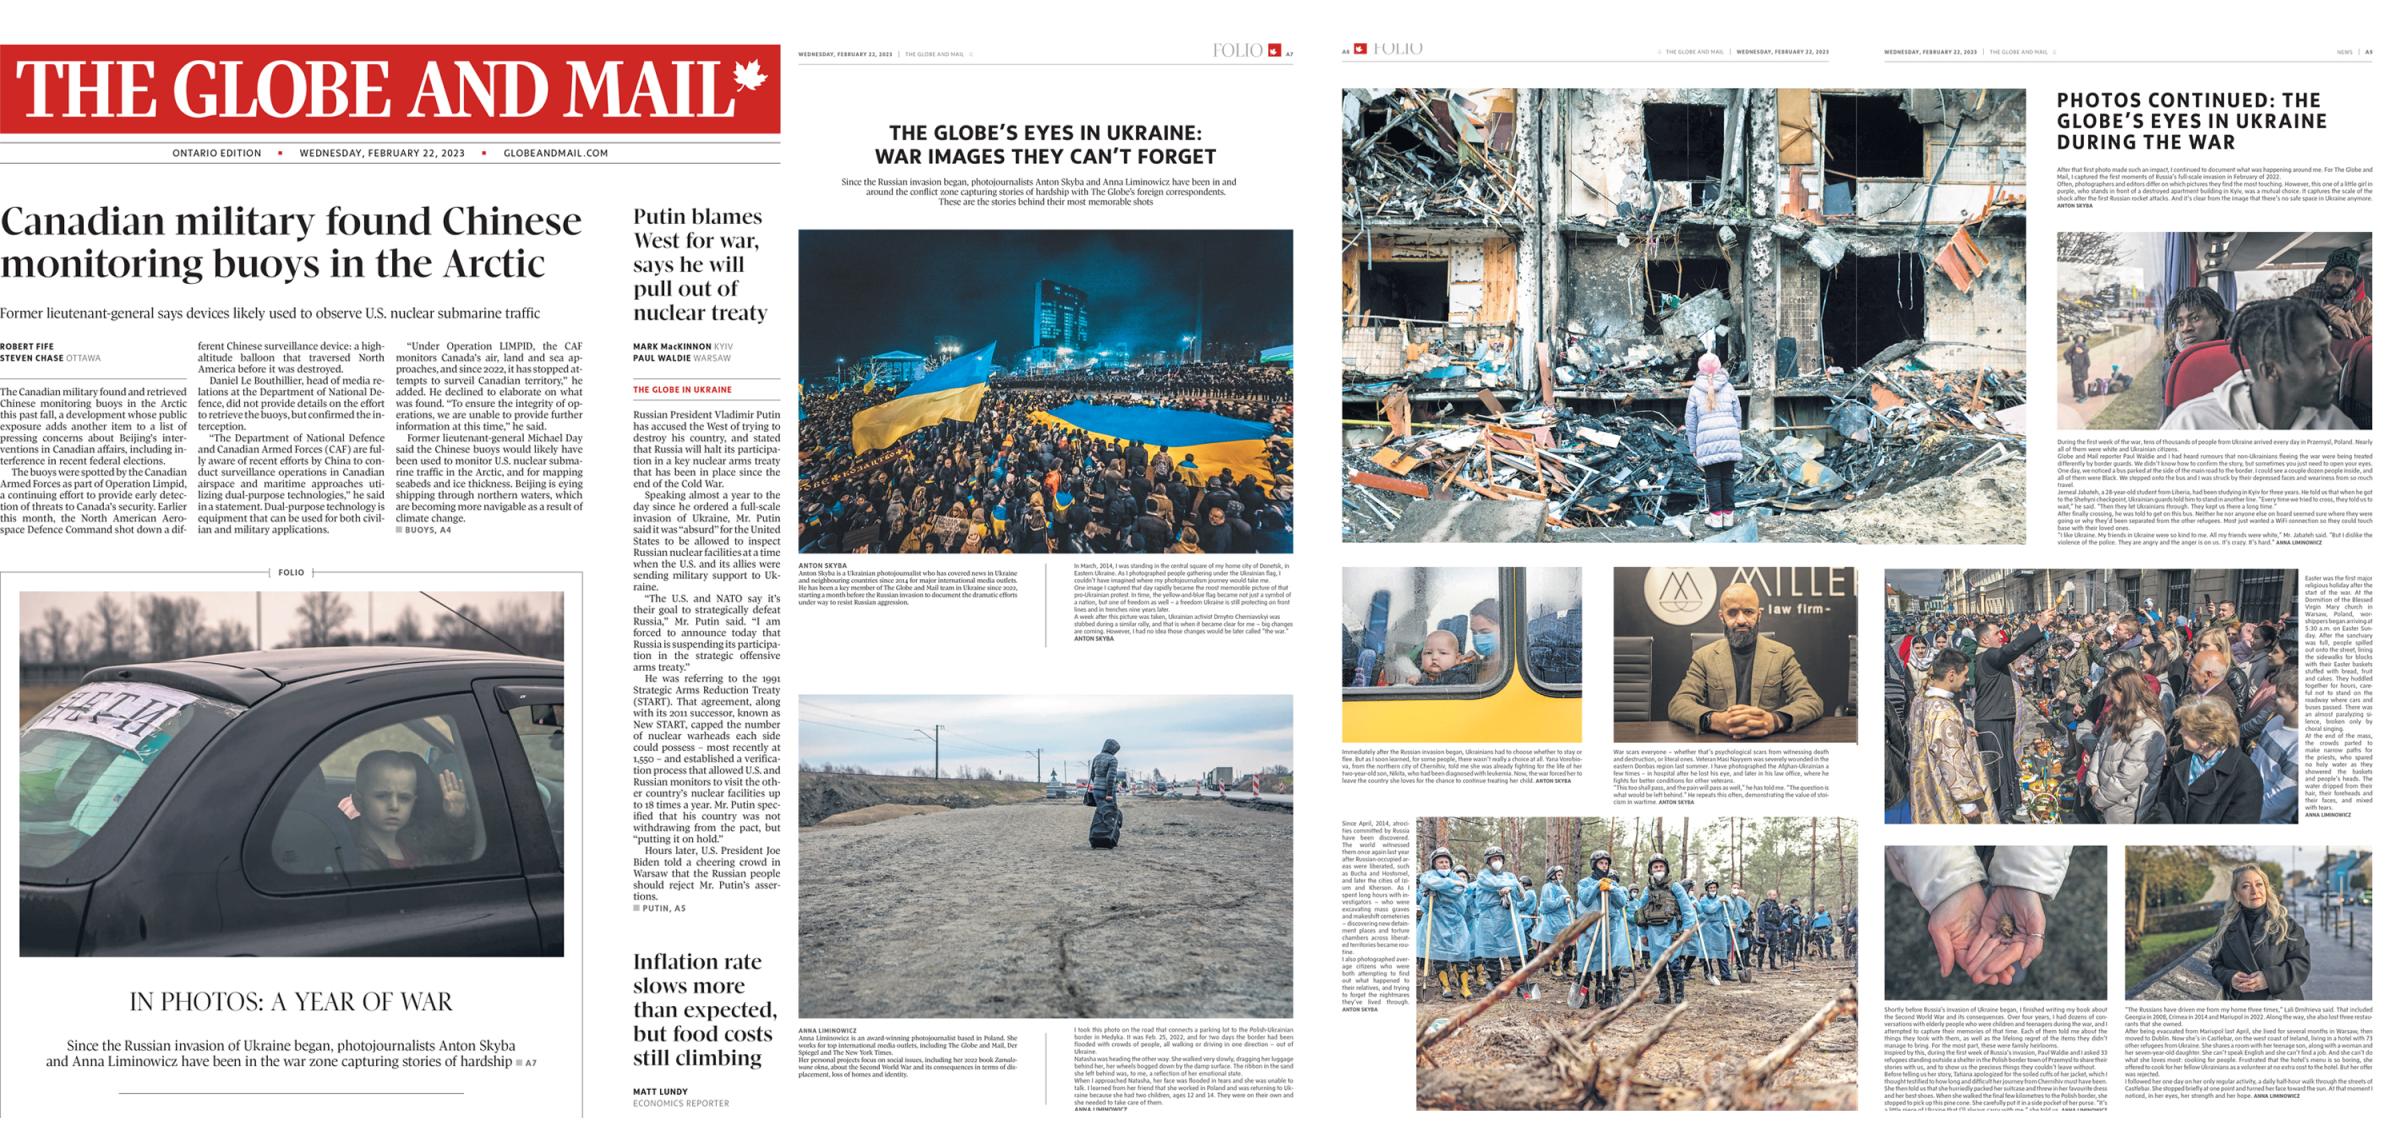 Art and Documentary Photography - Loading the_globe_and_mail_anna_liminowicz_one_year_war.jpg